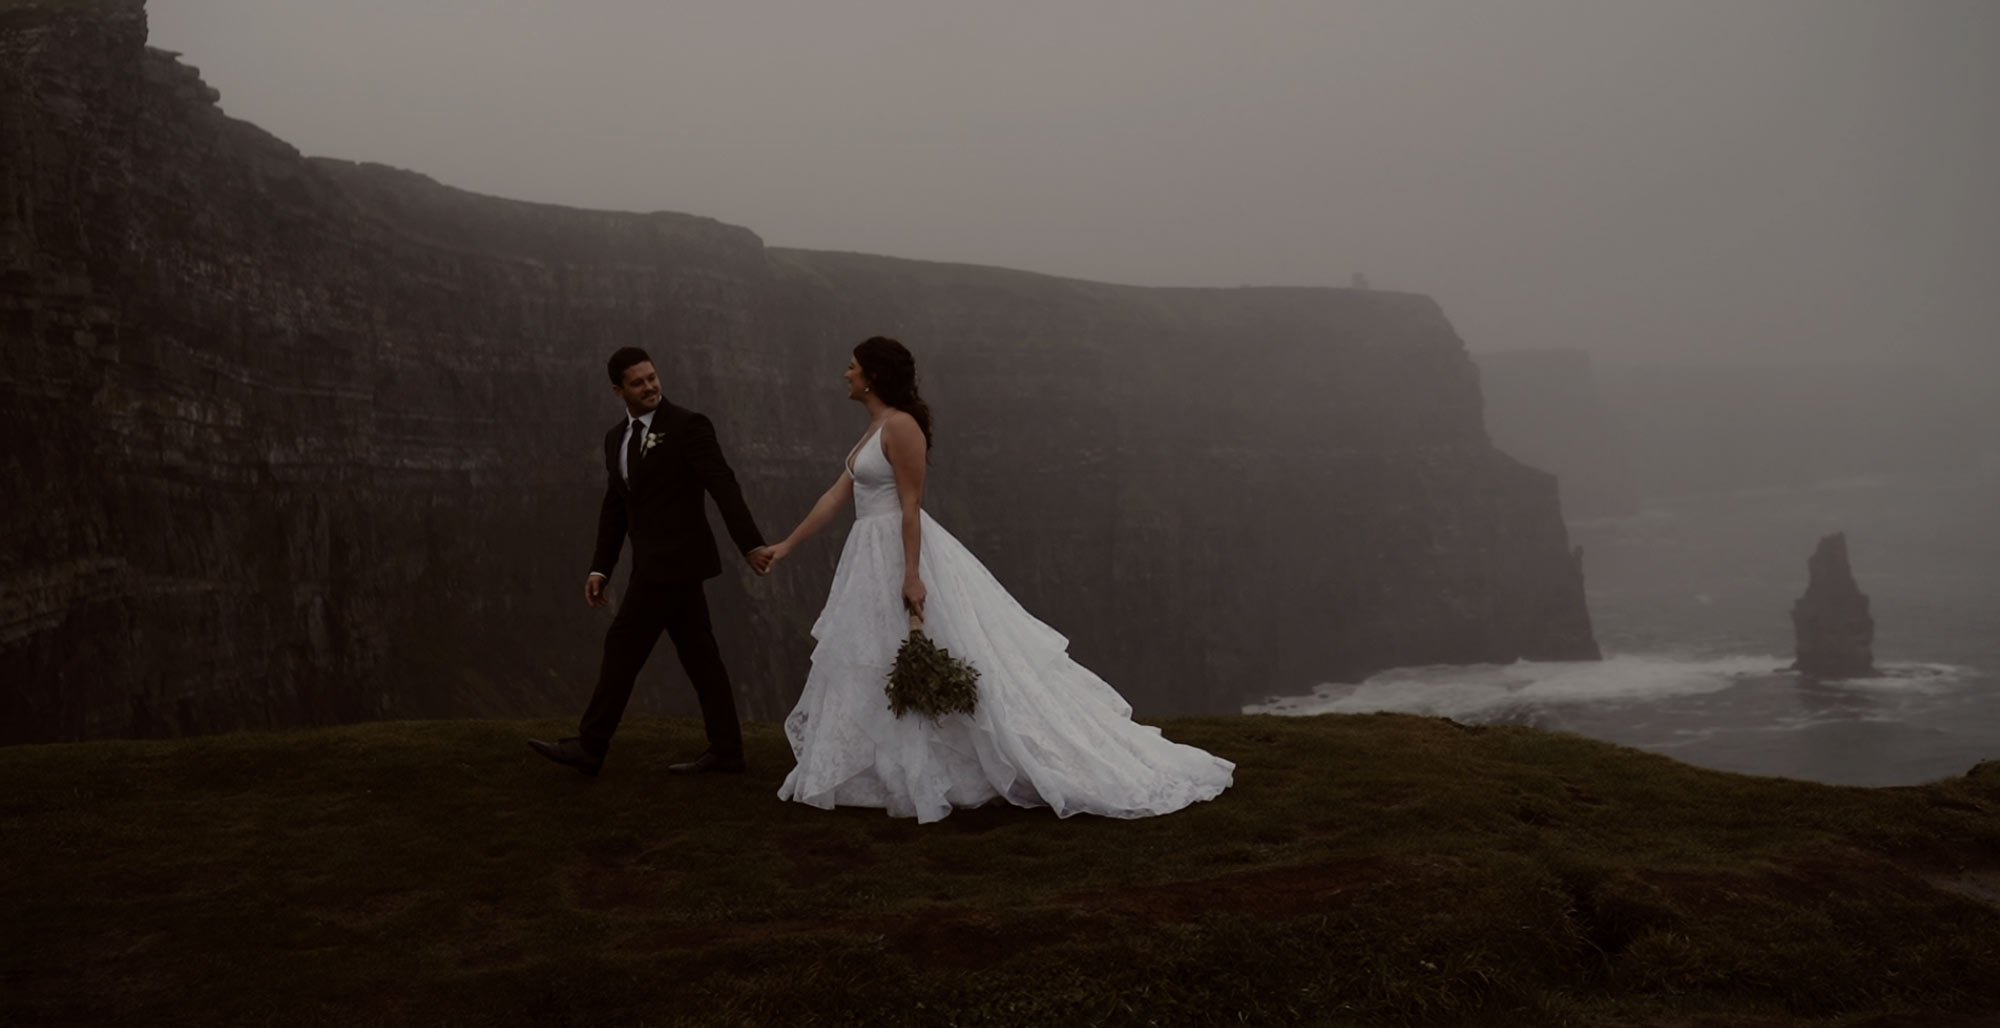 Creative Wedding Photography and Videography for Modern